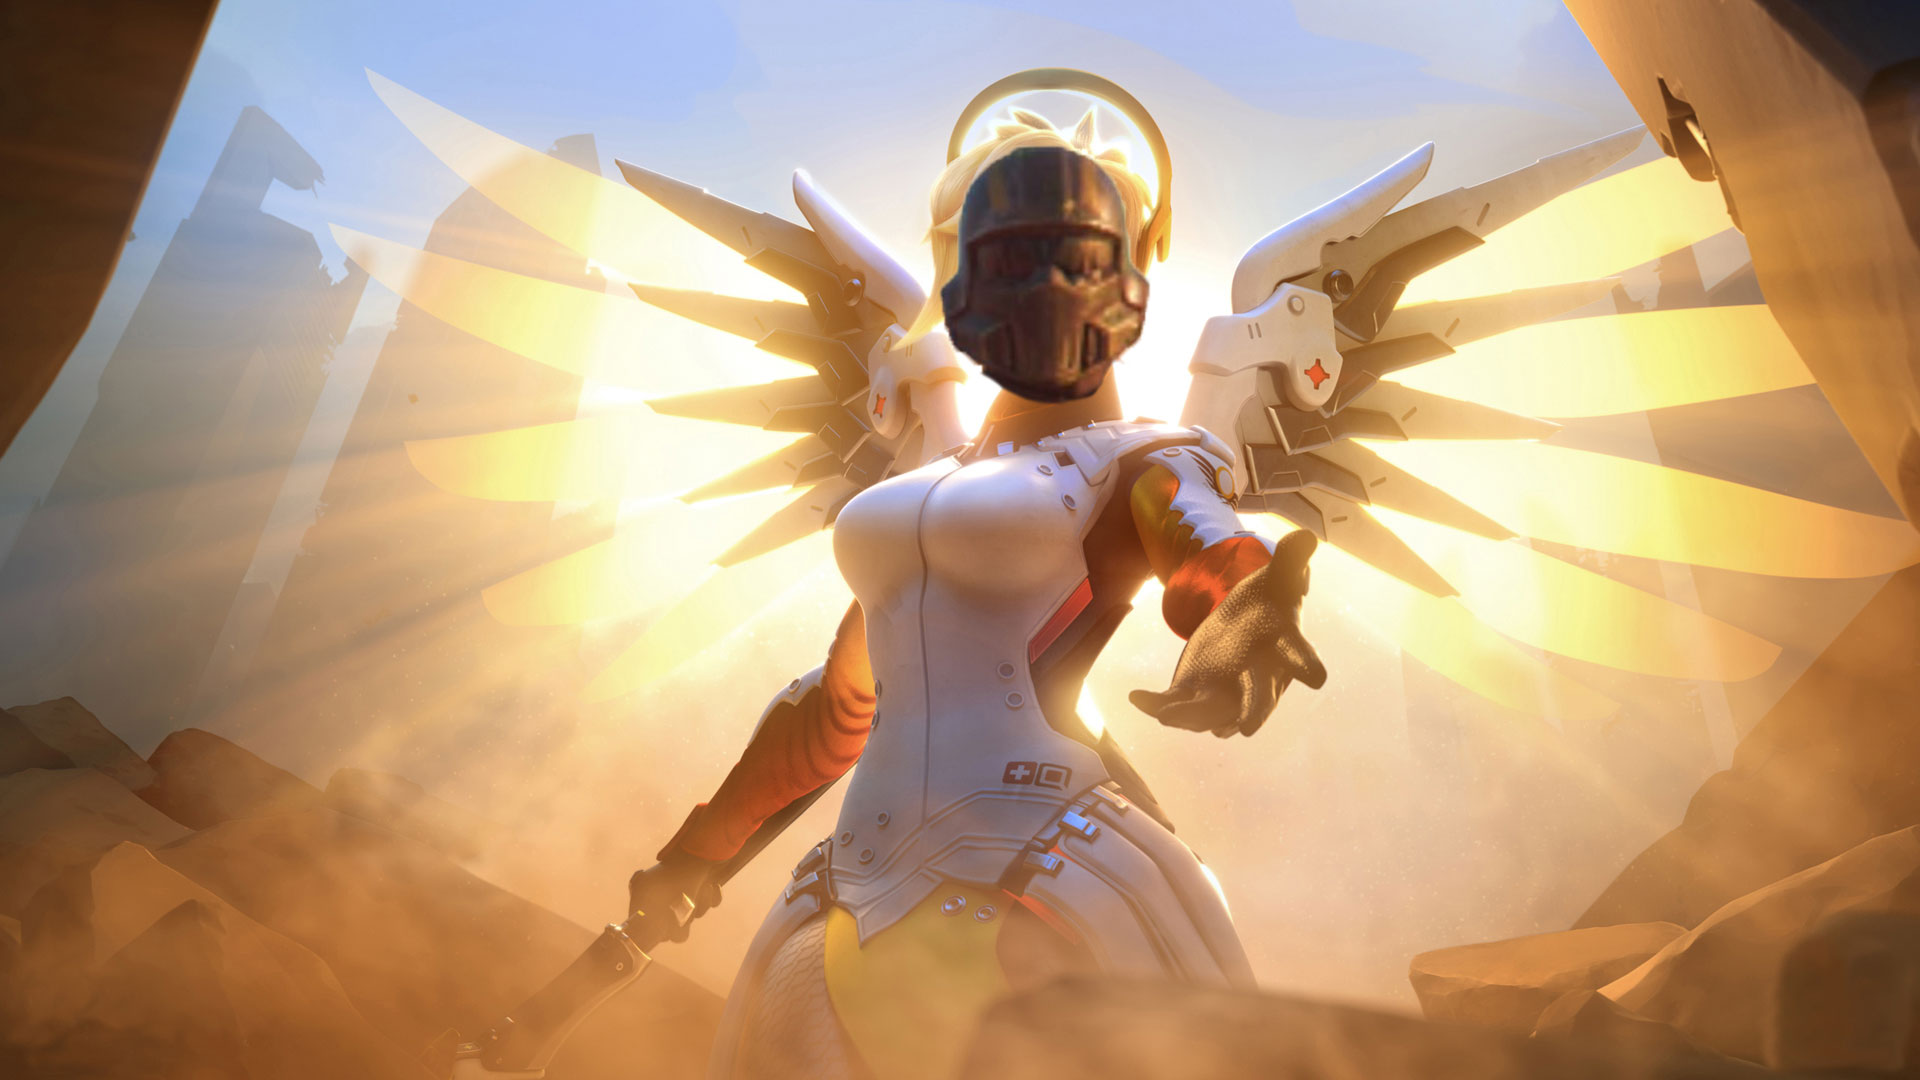 An image of the character Mercy, from the video game Overwatch, extending a hand towards the viewer to pull them from debris. A Helldivers 2 helmet is photoshopped in place of her face.